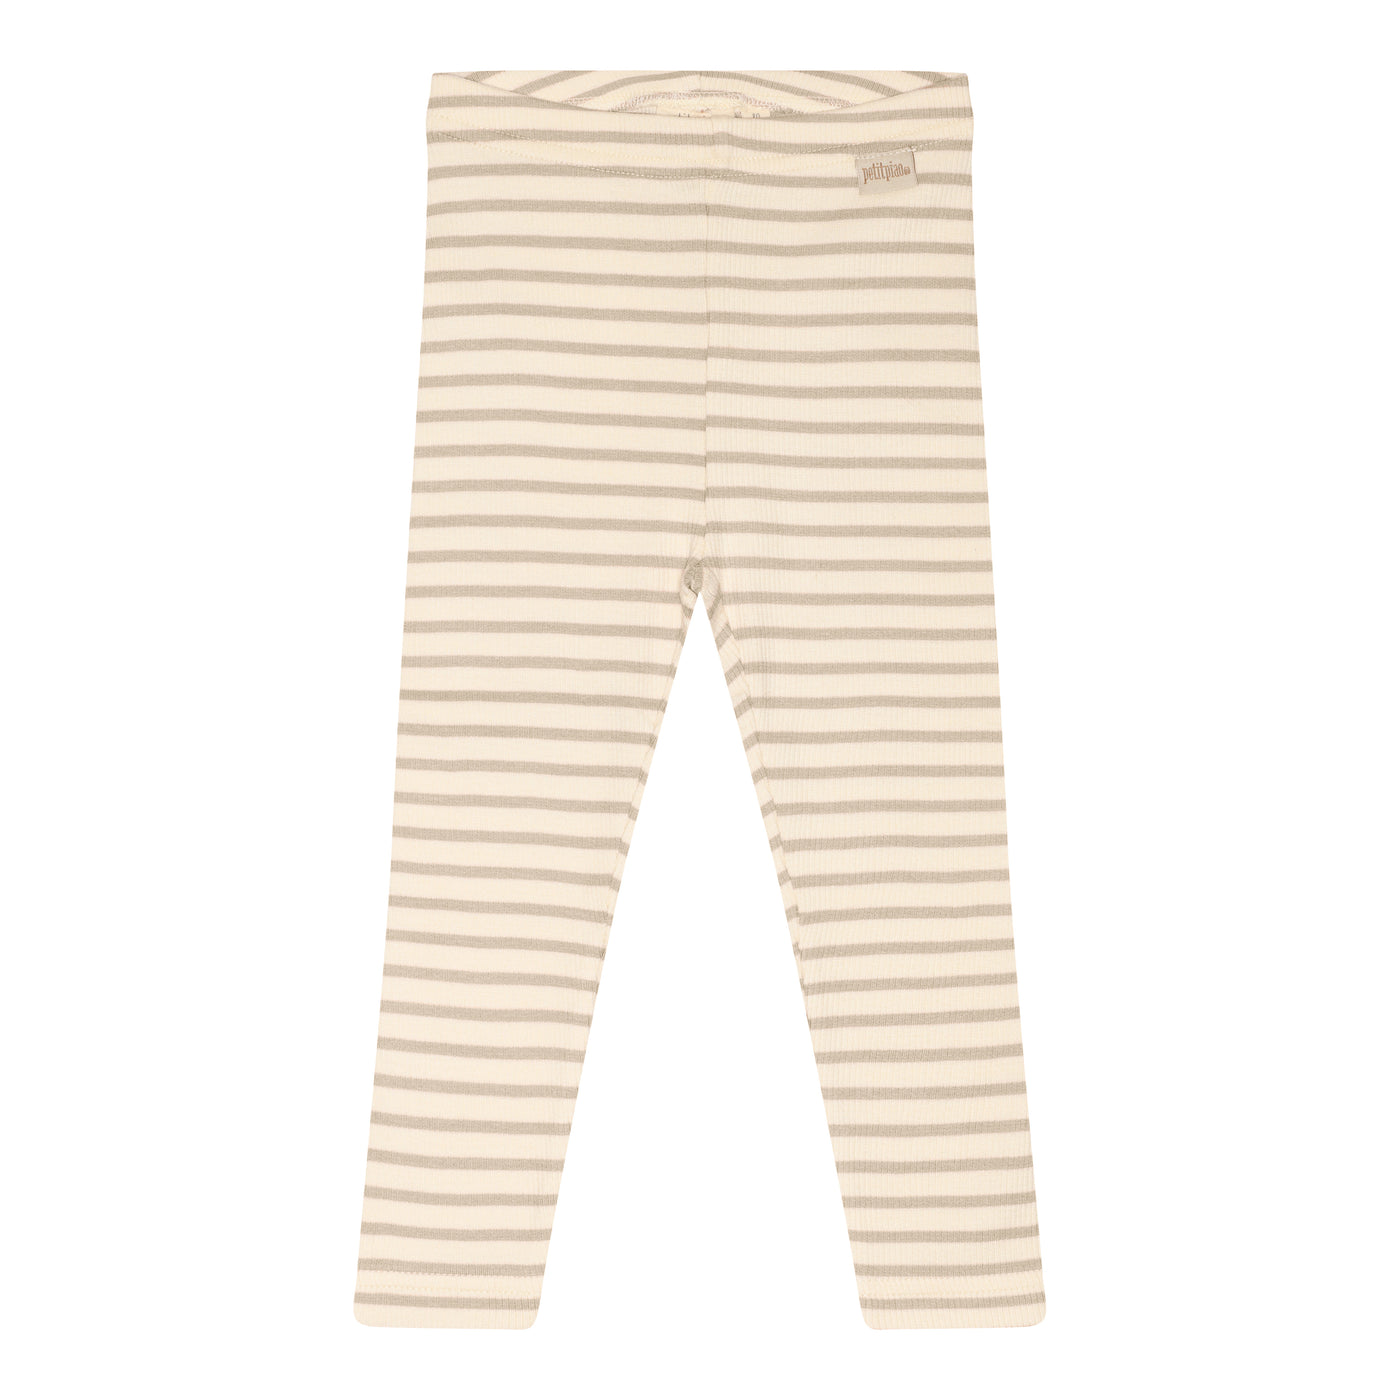 Petit piao V Legging Modal Striped Simply Taupe.